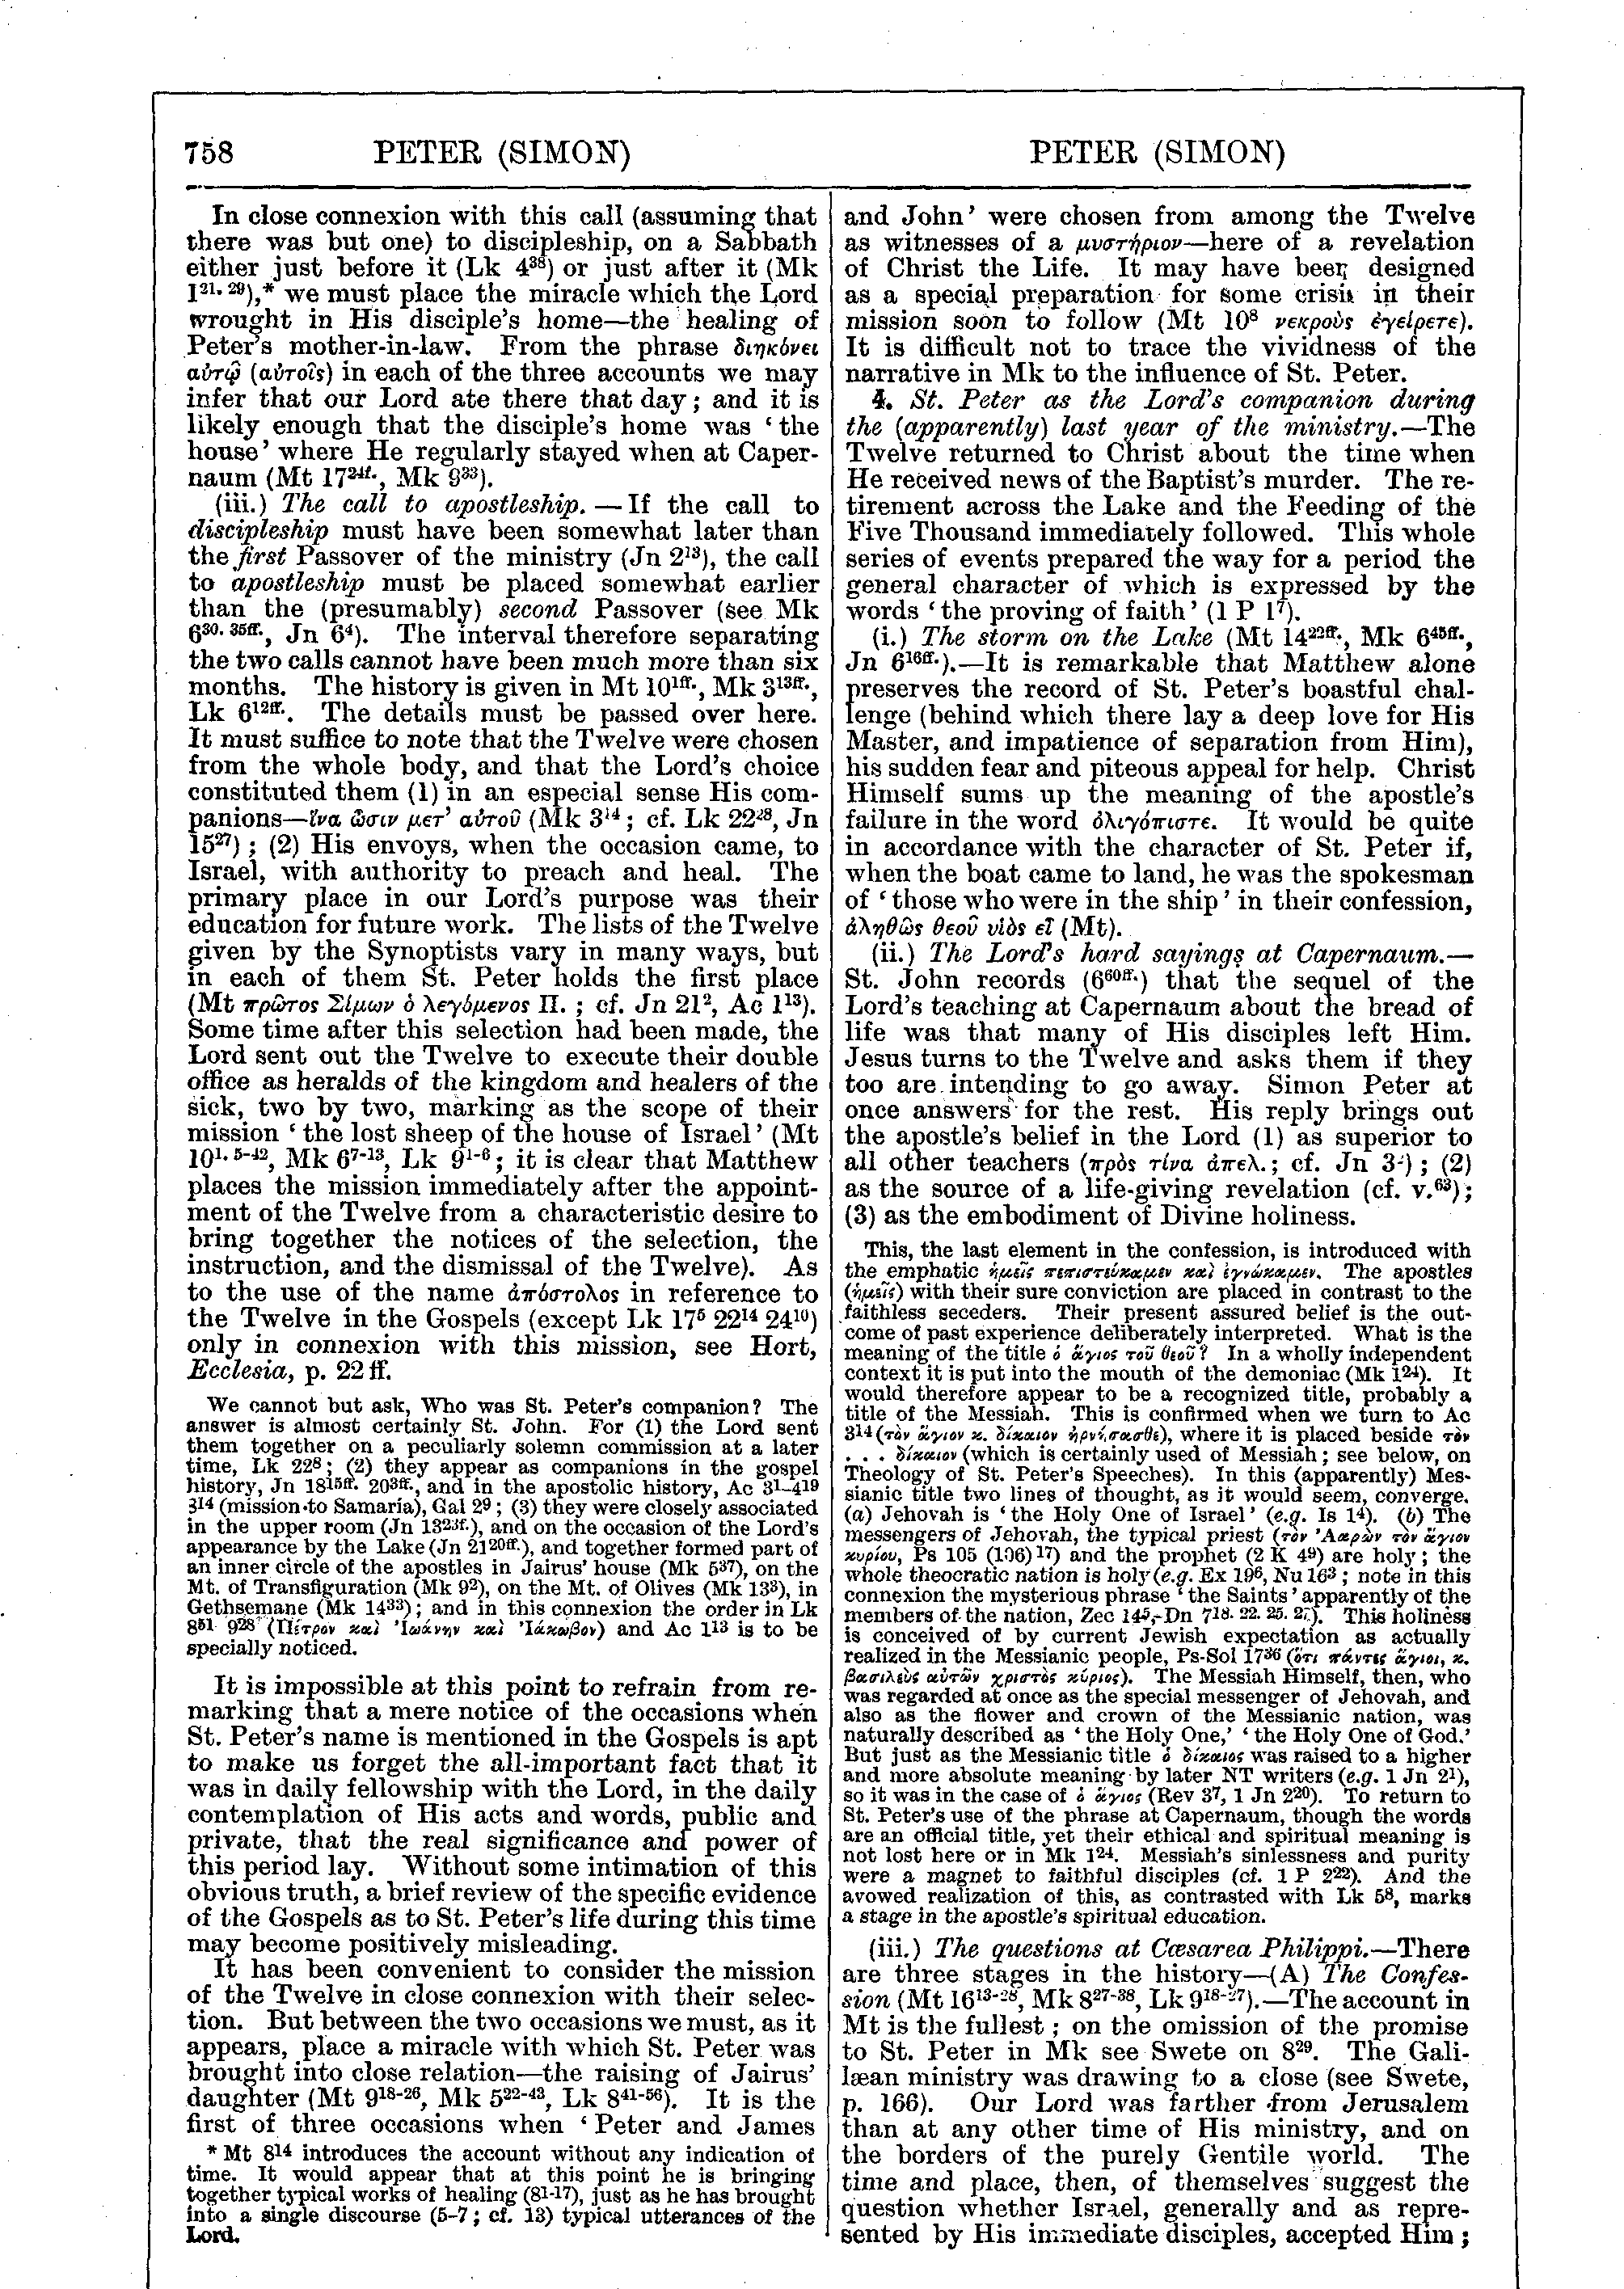 Image of page 758